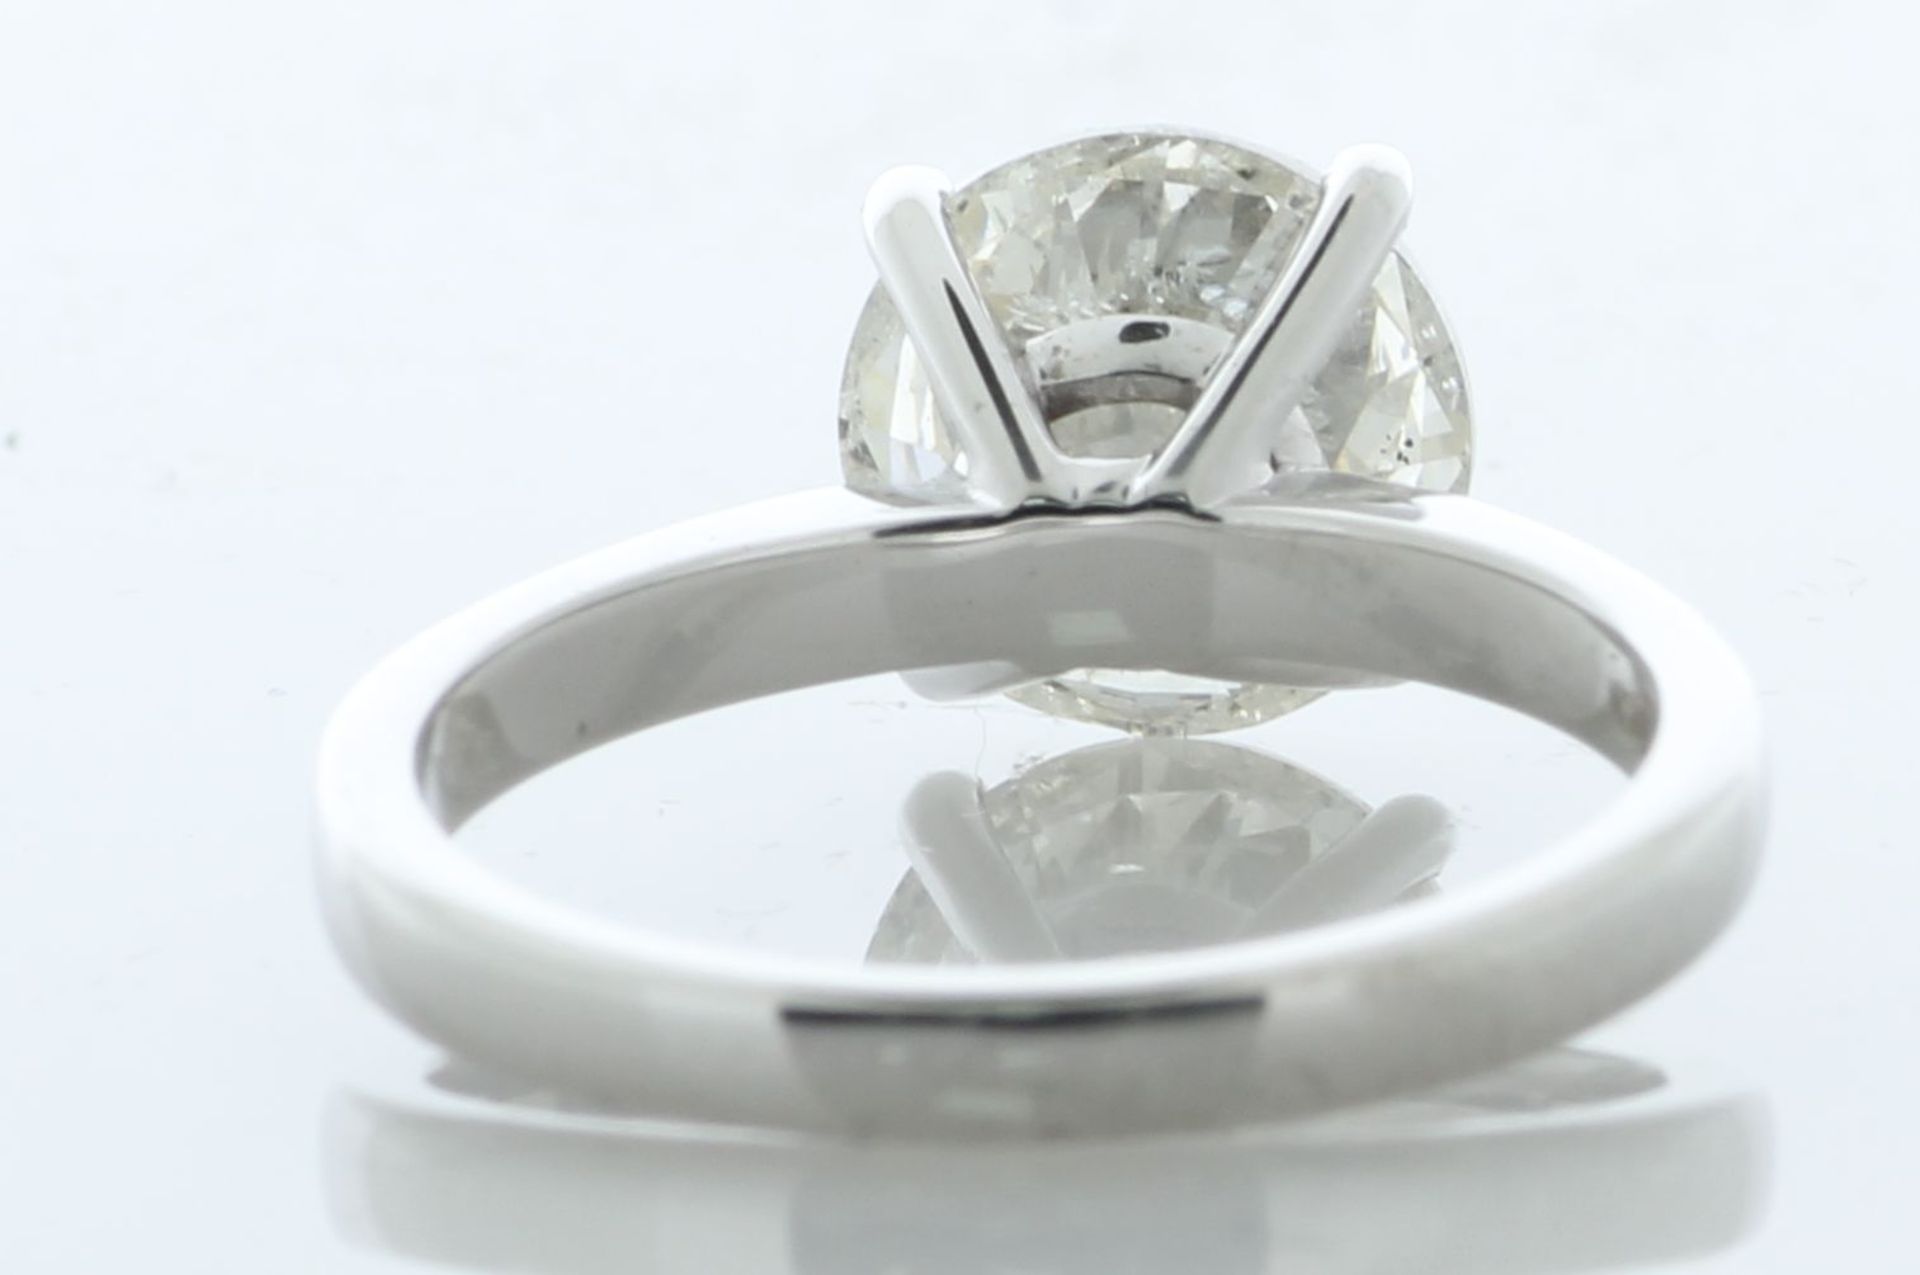 18ct White Gold Single Stone Prong Set Diamond Ring 2.67 Carats - Valued By IDI £66,900.00 - A - Image 4 of 5